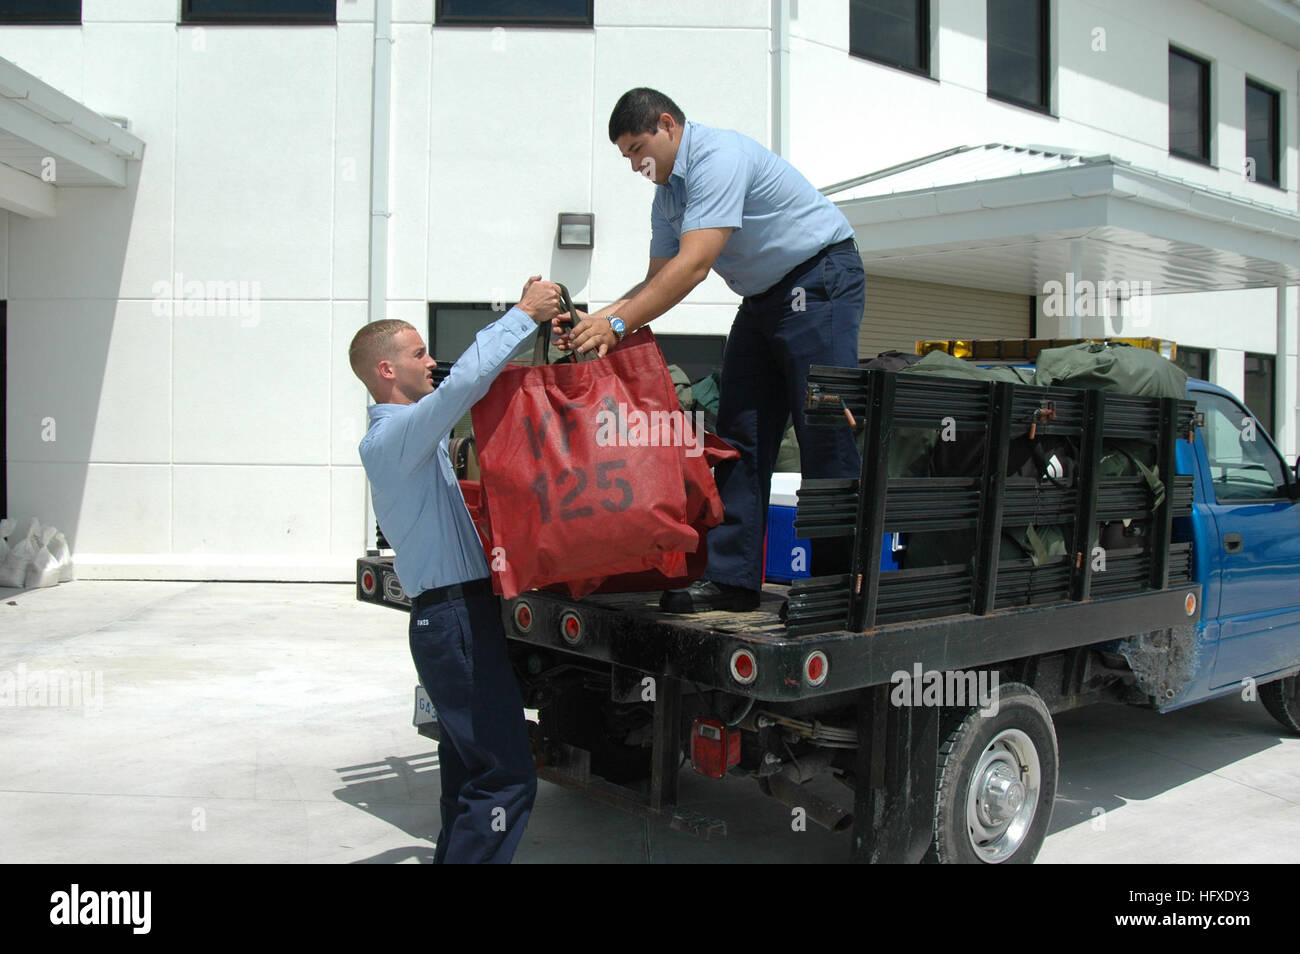 050919-N-0000B-001 Key West, Fla. (Sept. 19, 2005) – Sailors assigned to the “Rough Raiders” of Strike Fighter Squadron One Two Five (VFA-125), load support equipment during an ordered evacuation of the Florida Keys and Naval Air Station key West in advance of Hurricane Rita. Visiting squadrons were ordered to evacuate ahead of the category one hurricane, which is expected to pass very near Key West on Tuesday, Sept. 20th. Over two-dozen aircraft and 300 Sailors and Marines departed to air stations north of Key West. U.S. Navy photo by Mr. James Brooks (RELEASED) US Navy 050919-N-0000B-001 Sai Stock Photo